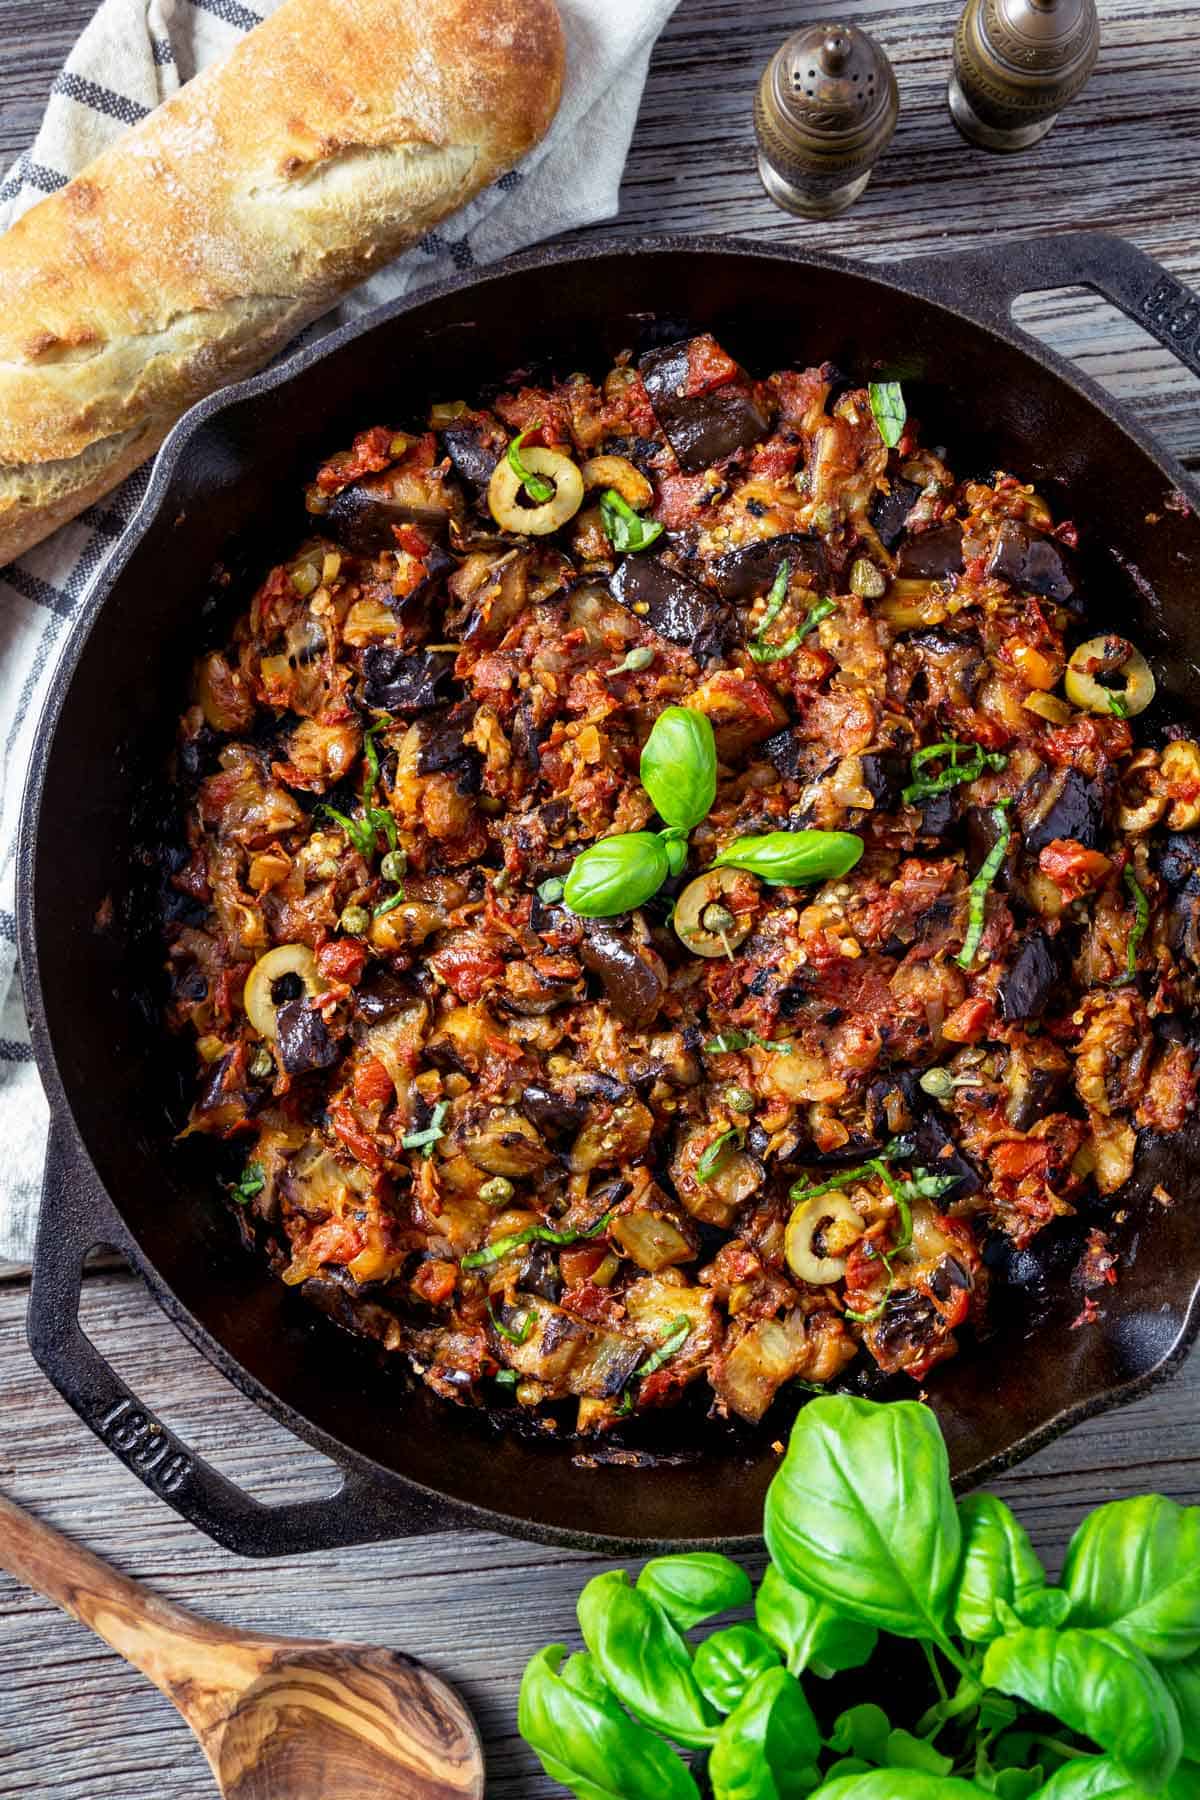 Eggplant caponata dish in a cast iron skillet served with bread.